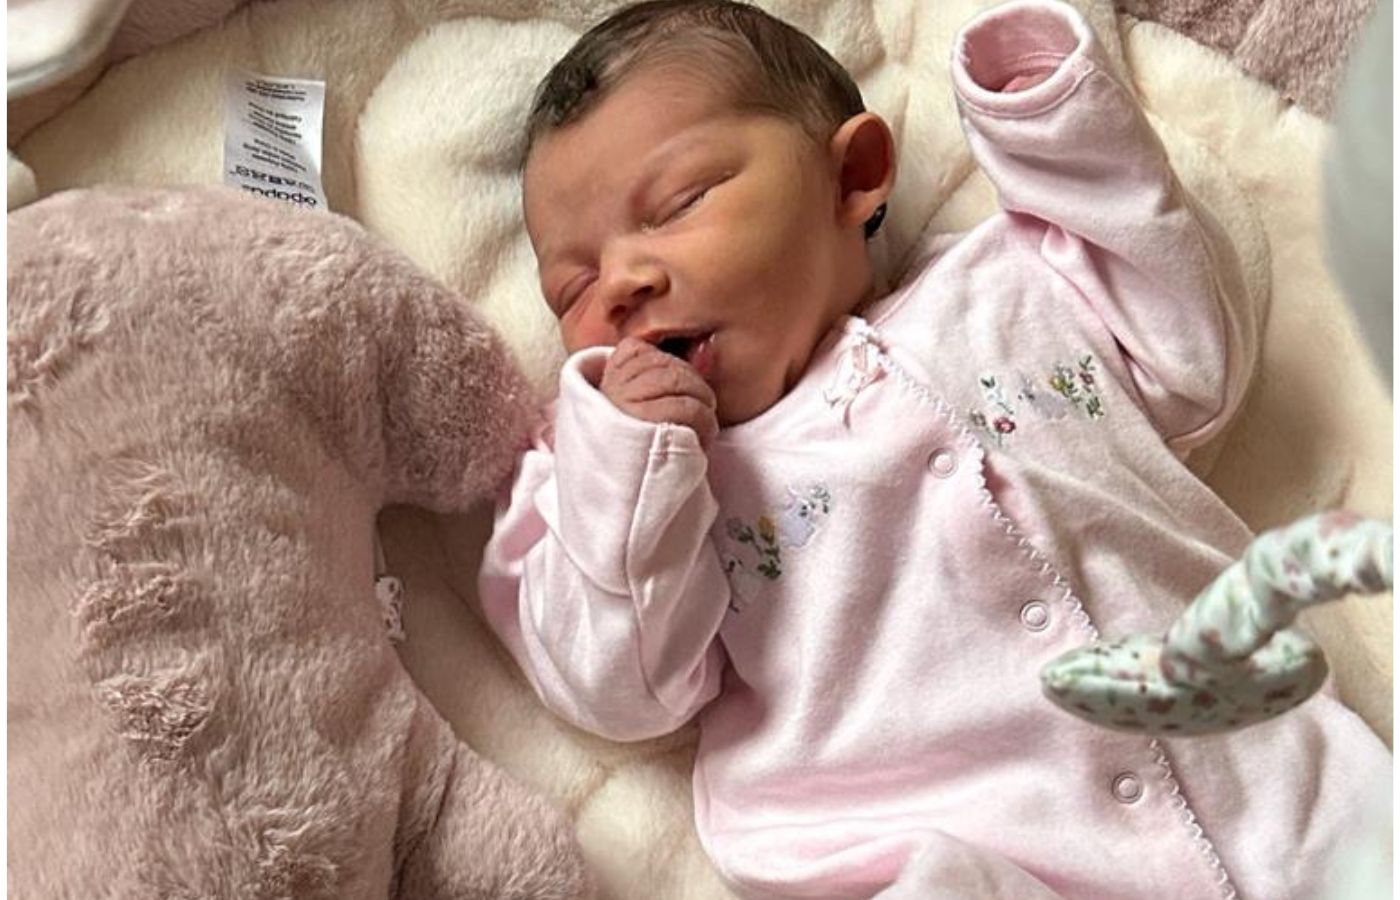 Baby Olivia was delivered safety after mum and dad Louise and Stephen were saved by ambulance crews.